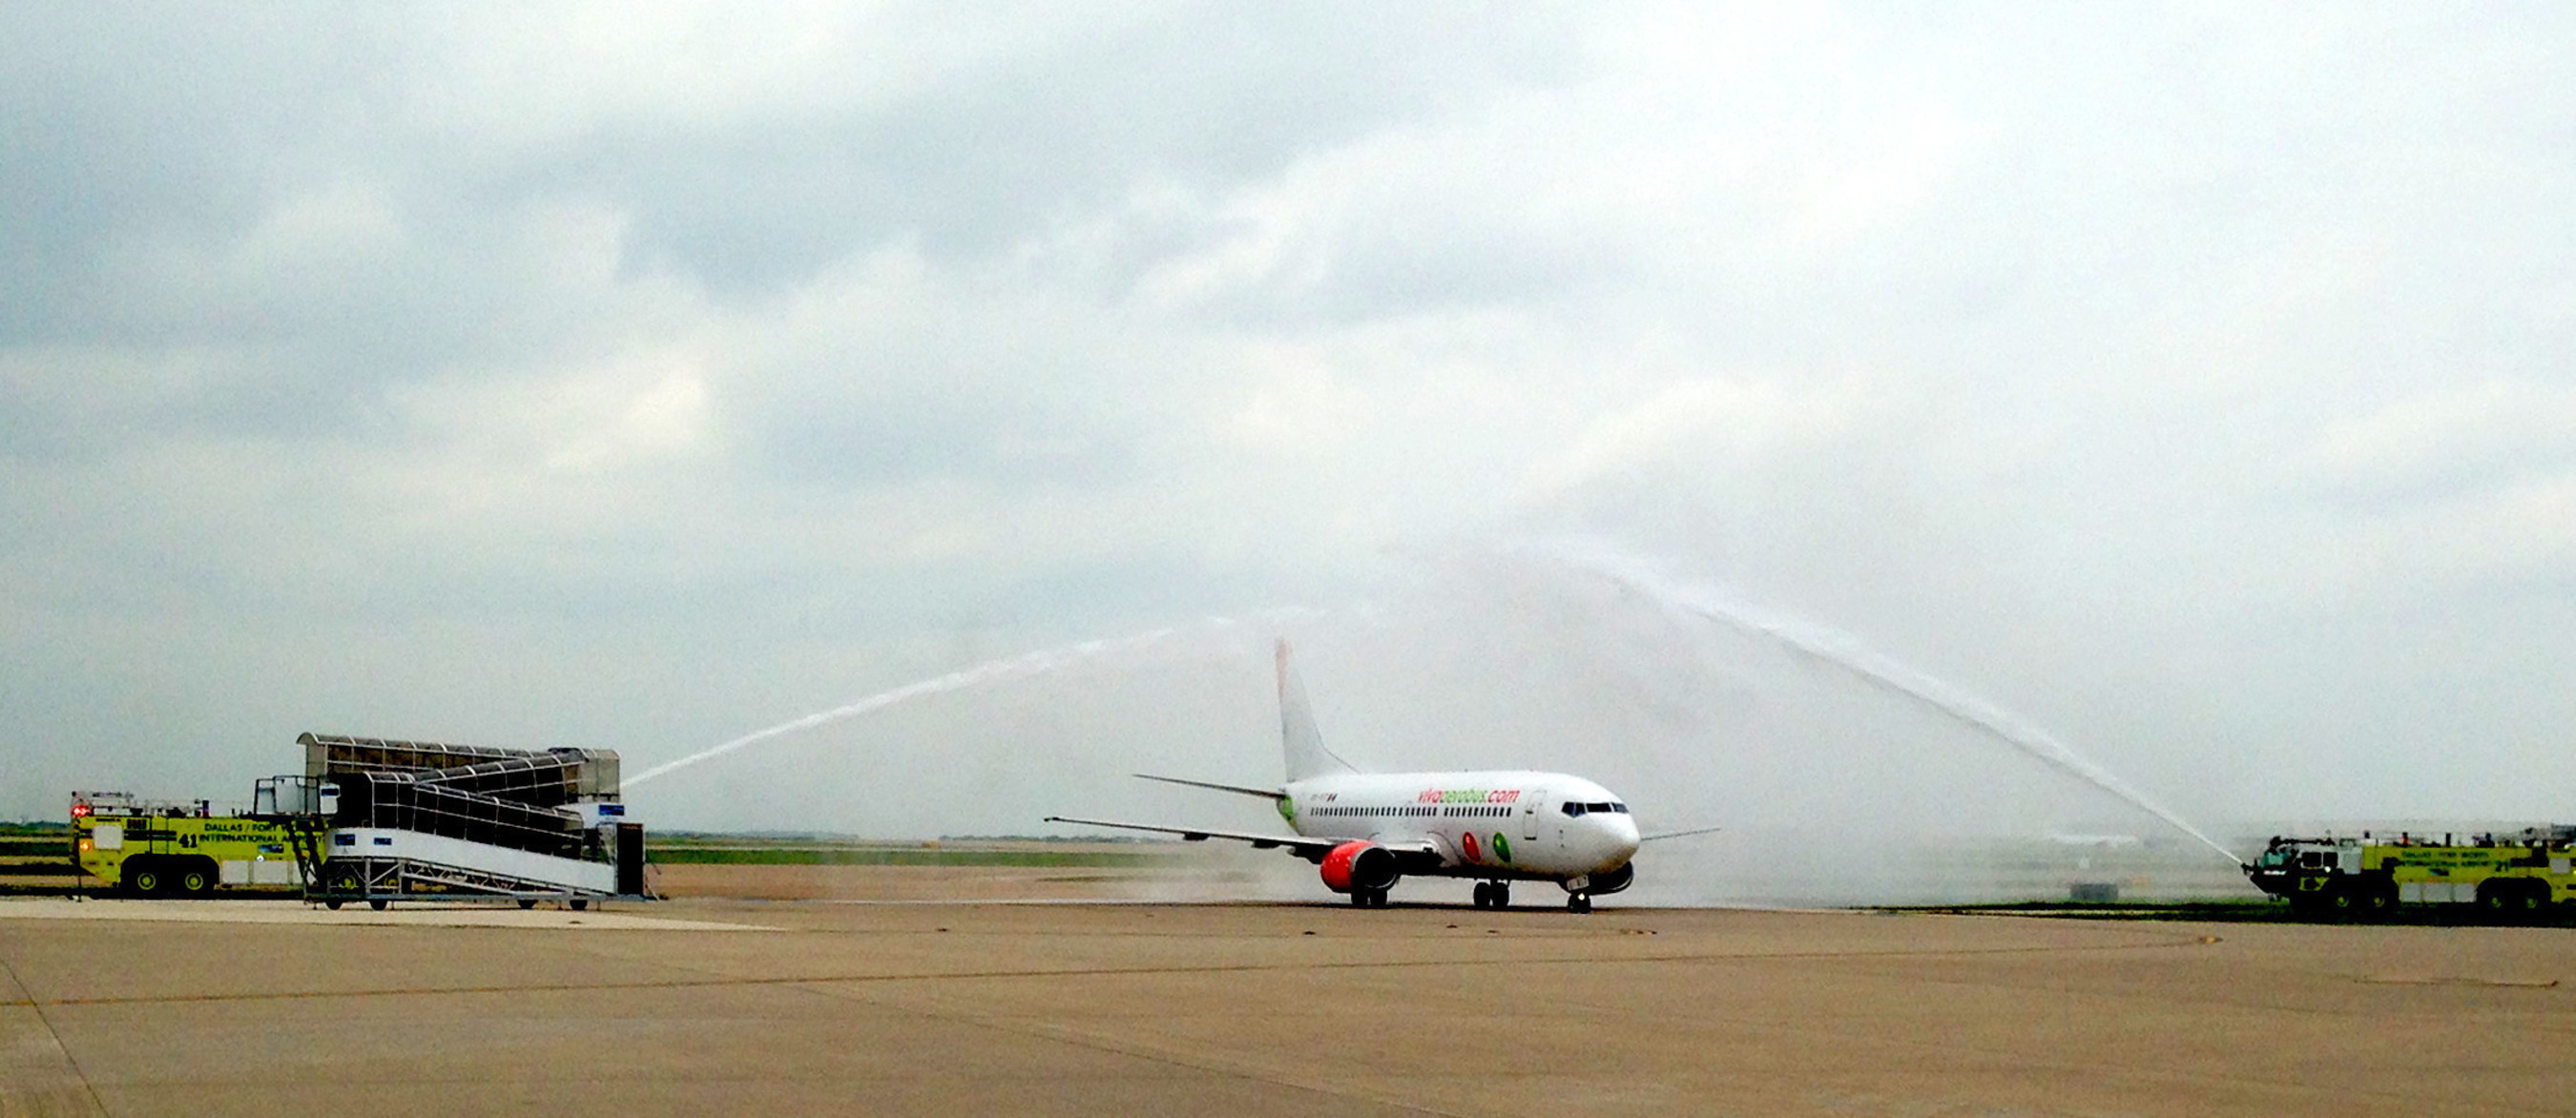 A Viva Aerobus 737 arrives at Dallas/Fort Worth International Airport to a water cannon "shower of affection" salute, as the carrier begins service at DFW.